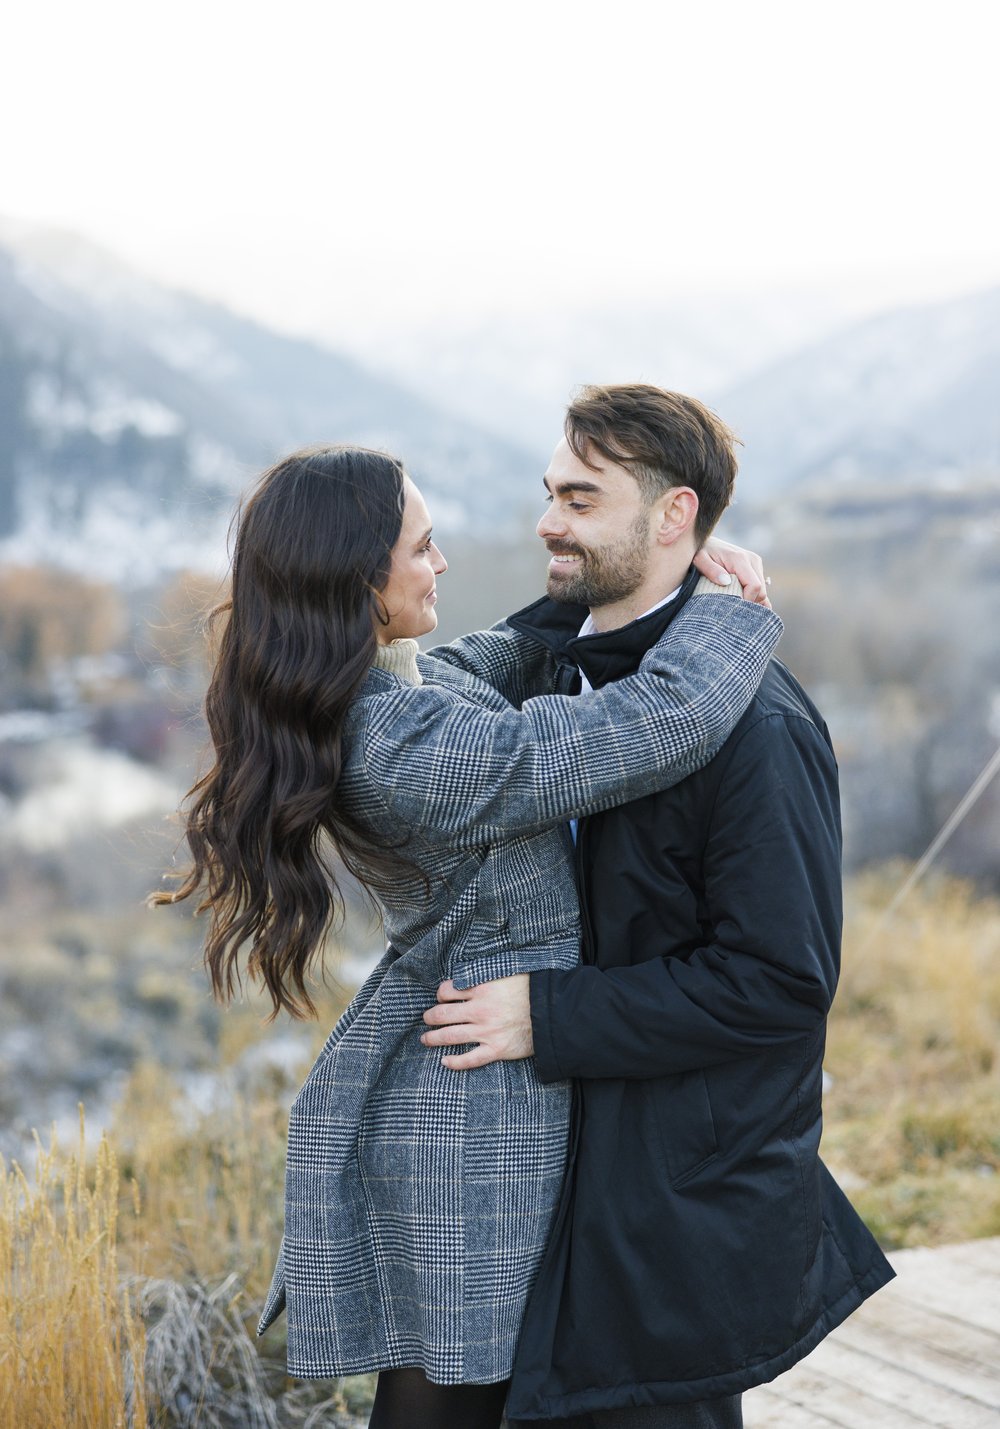  Savanna Richardson Photography captures an engaged couple embracing after the proposal in the Utah mountains. mountain engagements #SavannaRichardsonPhotography #Proposal #proposalphotography #ProProposalCompany #engaged #engagementphotography 